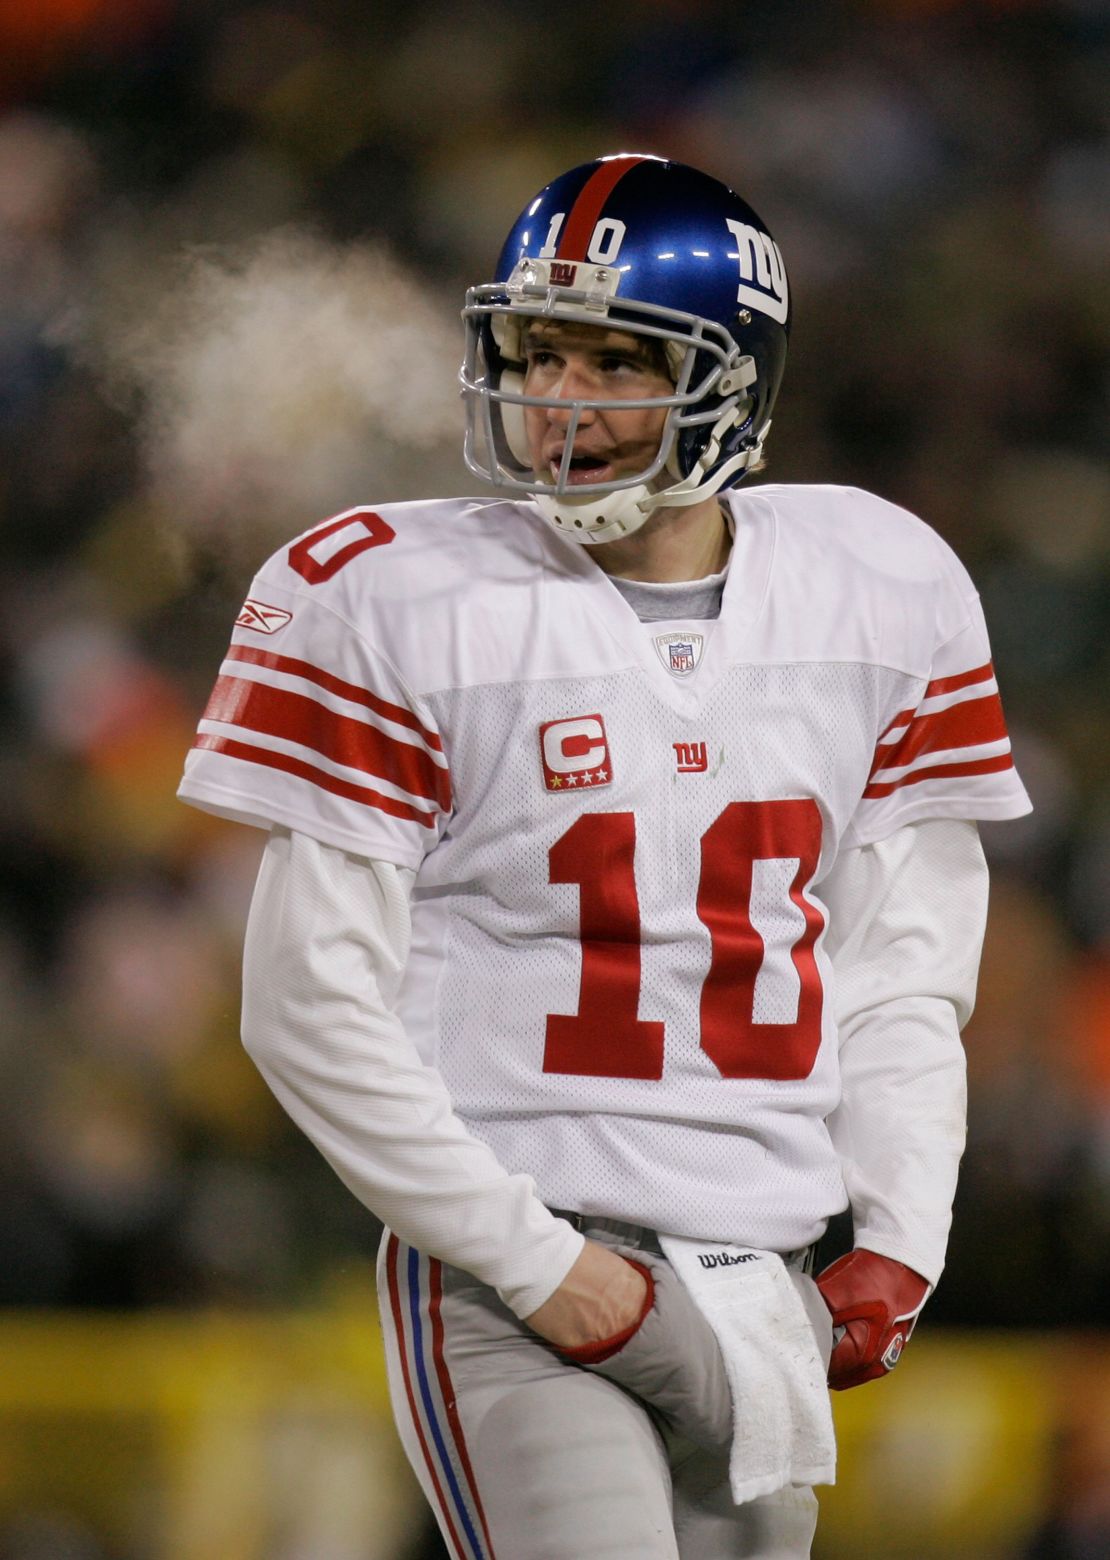 New York Giants quarterback Eli Manning during the NFC Championship football game against the Green Bay Packers Sunday, Jan. 20, 2008, in Green Bay, Wis. (AP Photo/Jeff Roberson)